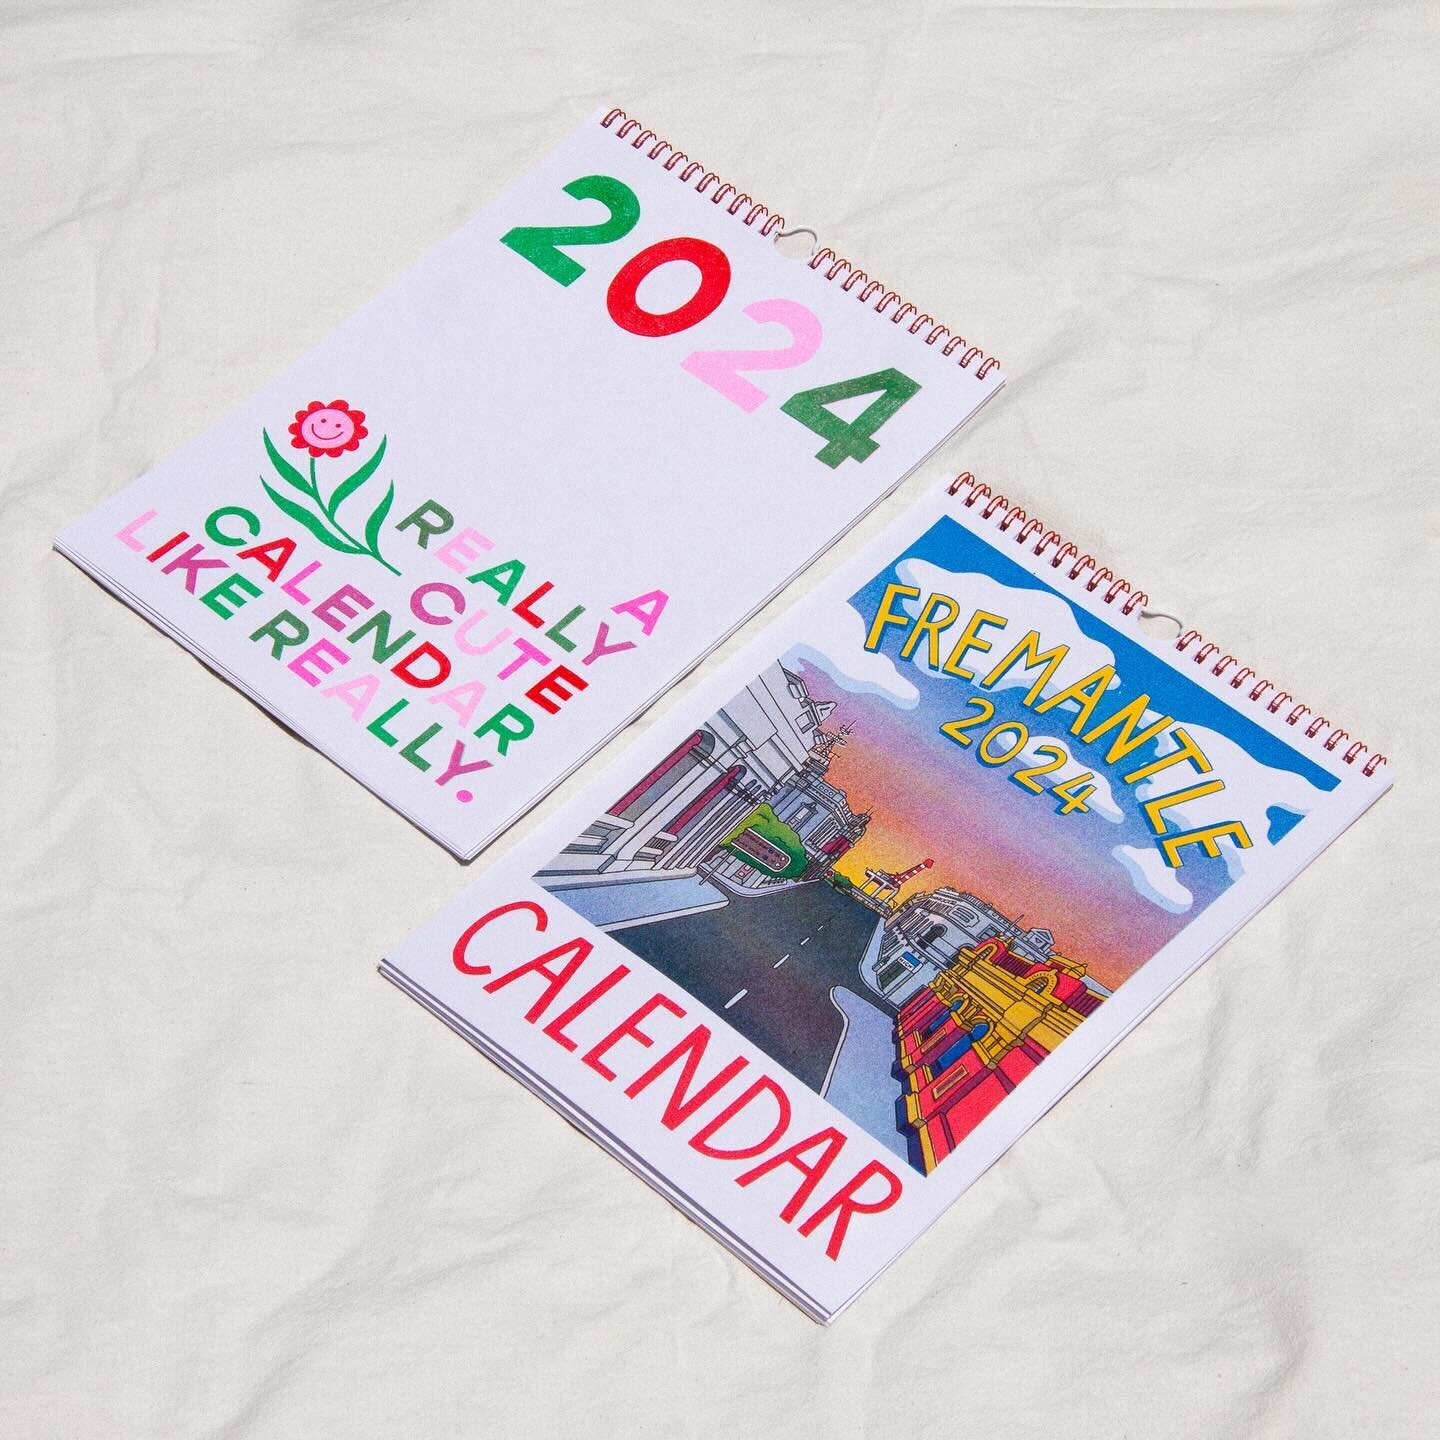 The pointy end of the year is fast approaching and in an effort to make this time a little easier on you, we&rsquo;ve created a range of bundle offers which we think make the ultimate gifts.

First up is the Calendar Collector Bundle which includes b